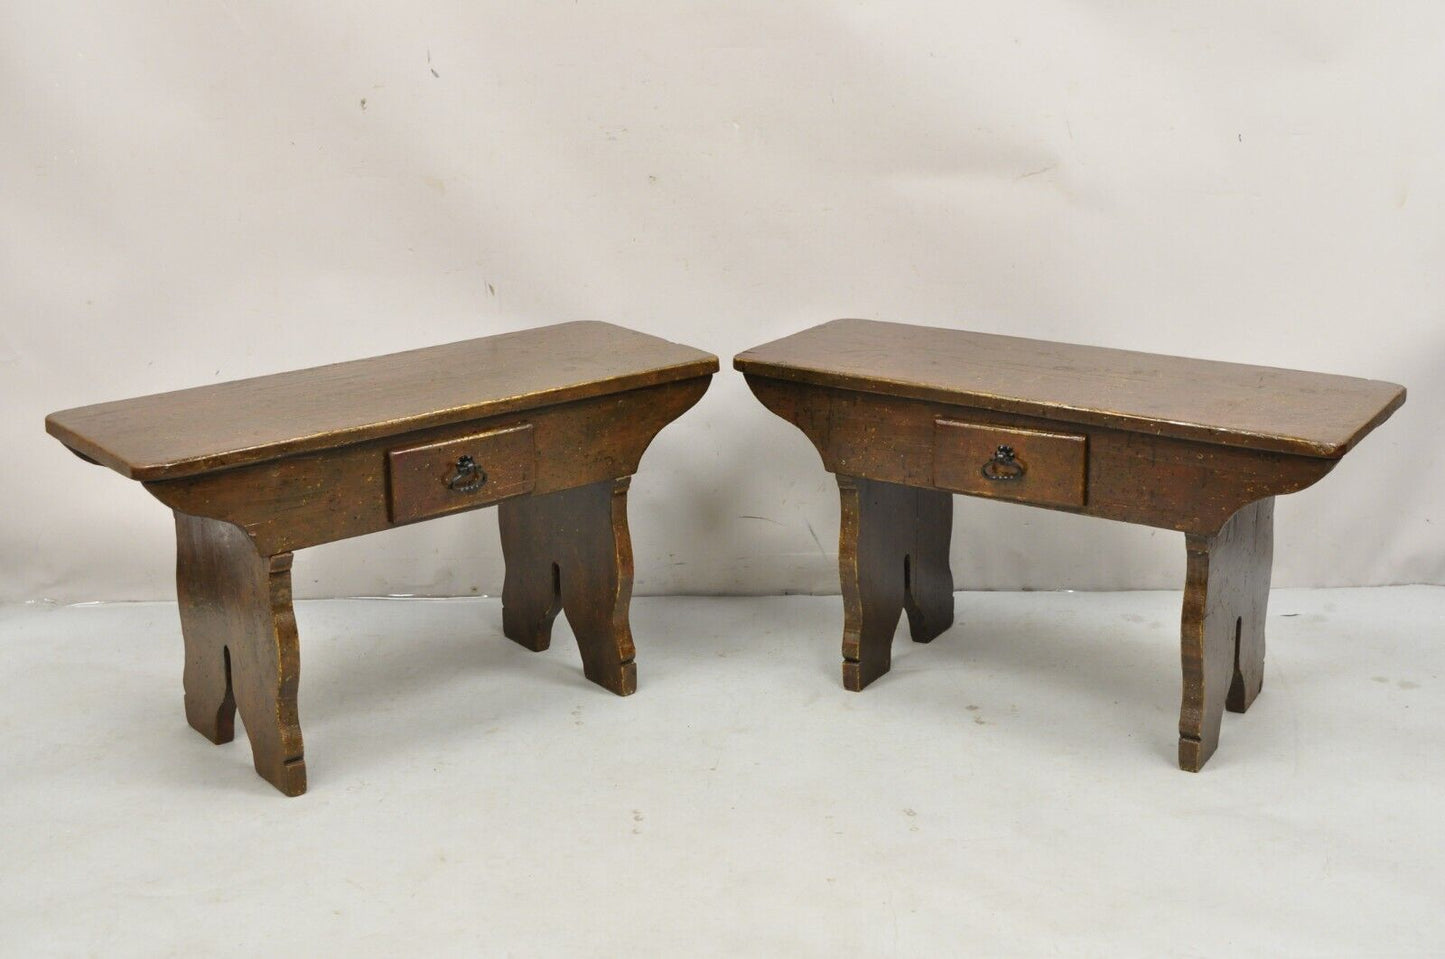 Antique French Country Farmhouse Pine Wood Low Side Table Bench w/ Drawer - Pair